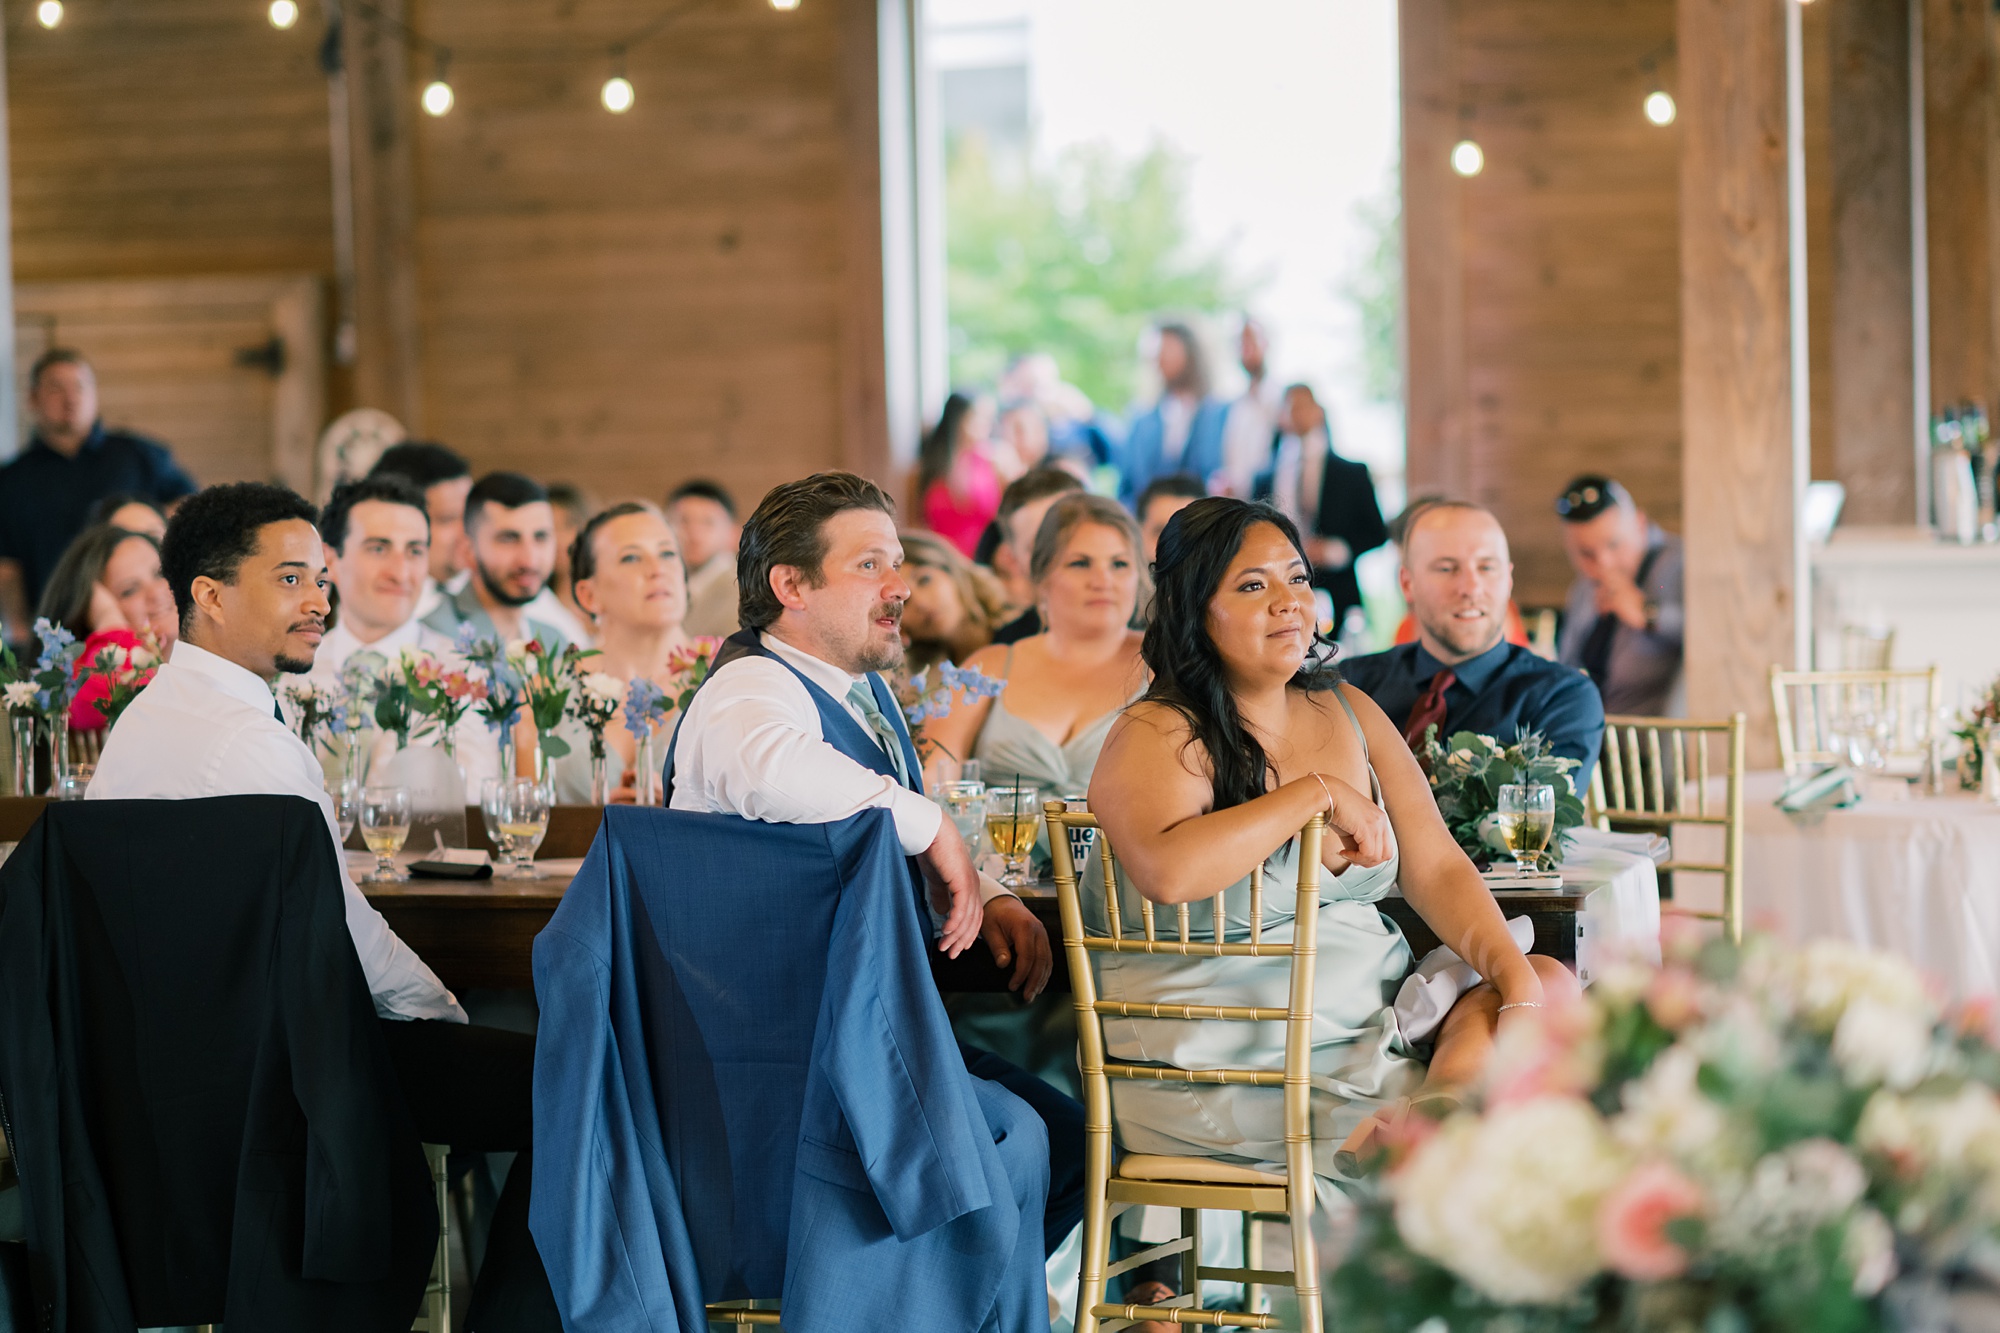 guests listen to speeches during wedding at the Pavilion at Weatherly